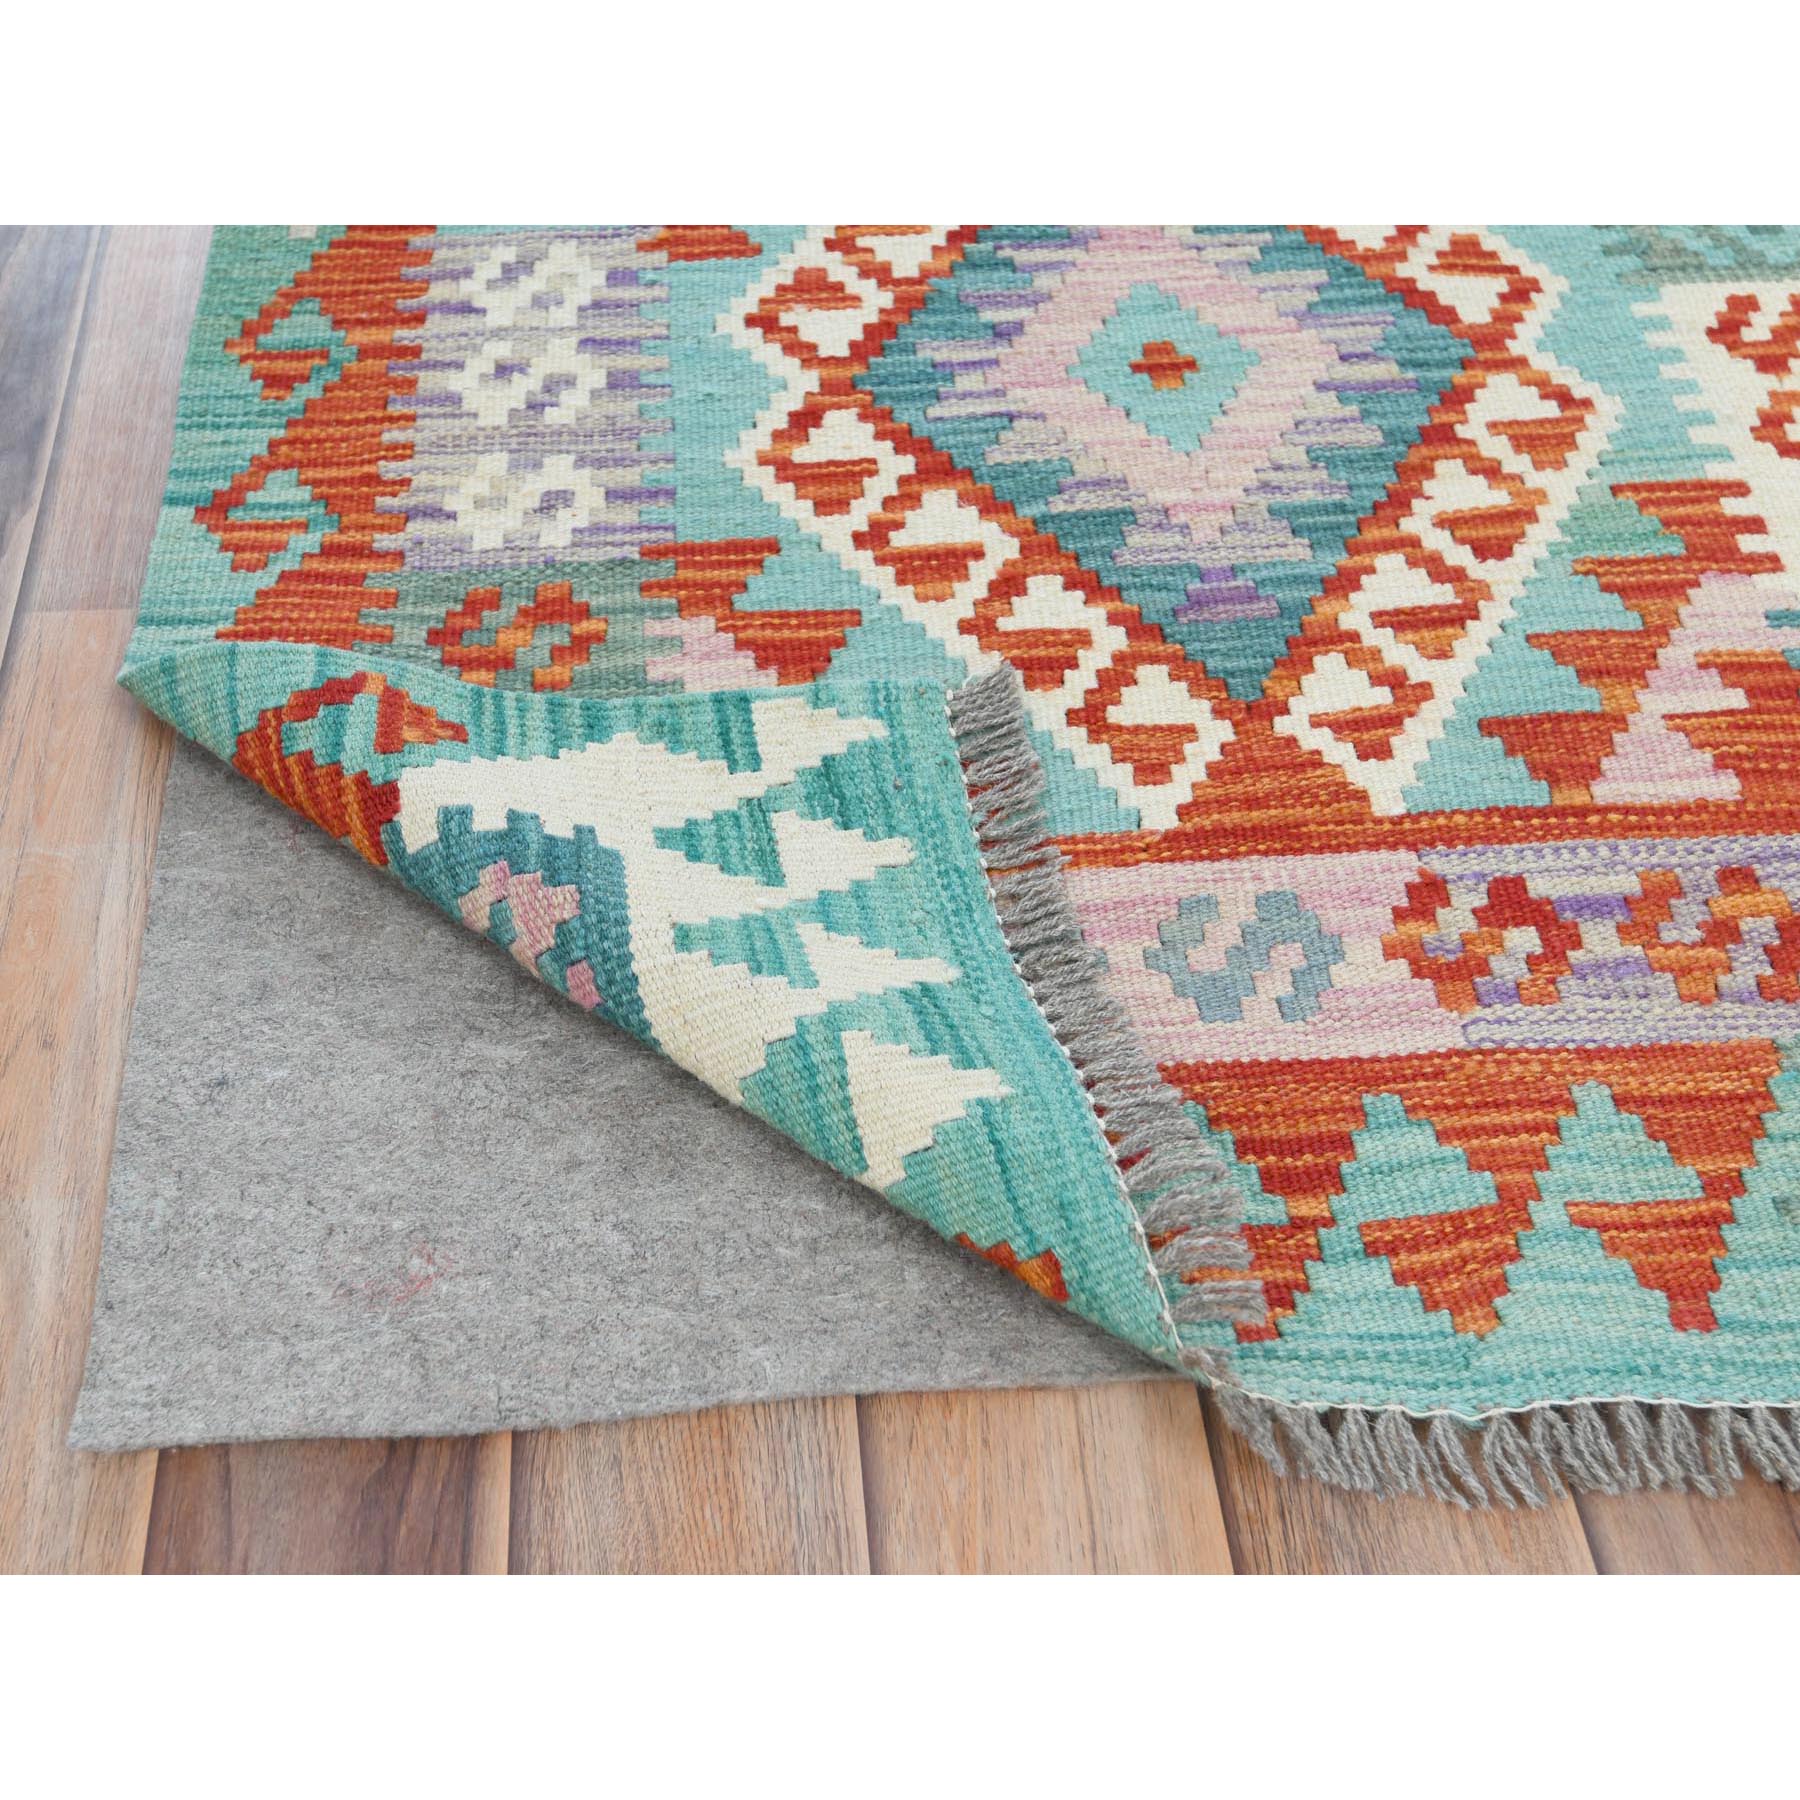 2'8"x15'5" Colorful, Afghan Kilim with Geometric Design, Pure Wool, Hand Woven, Vegetable Dyes, Flat Weave, Reversible XL Runner Oriental Rug 